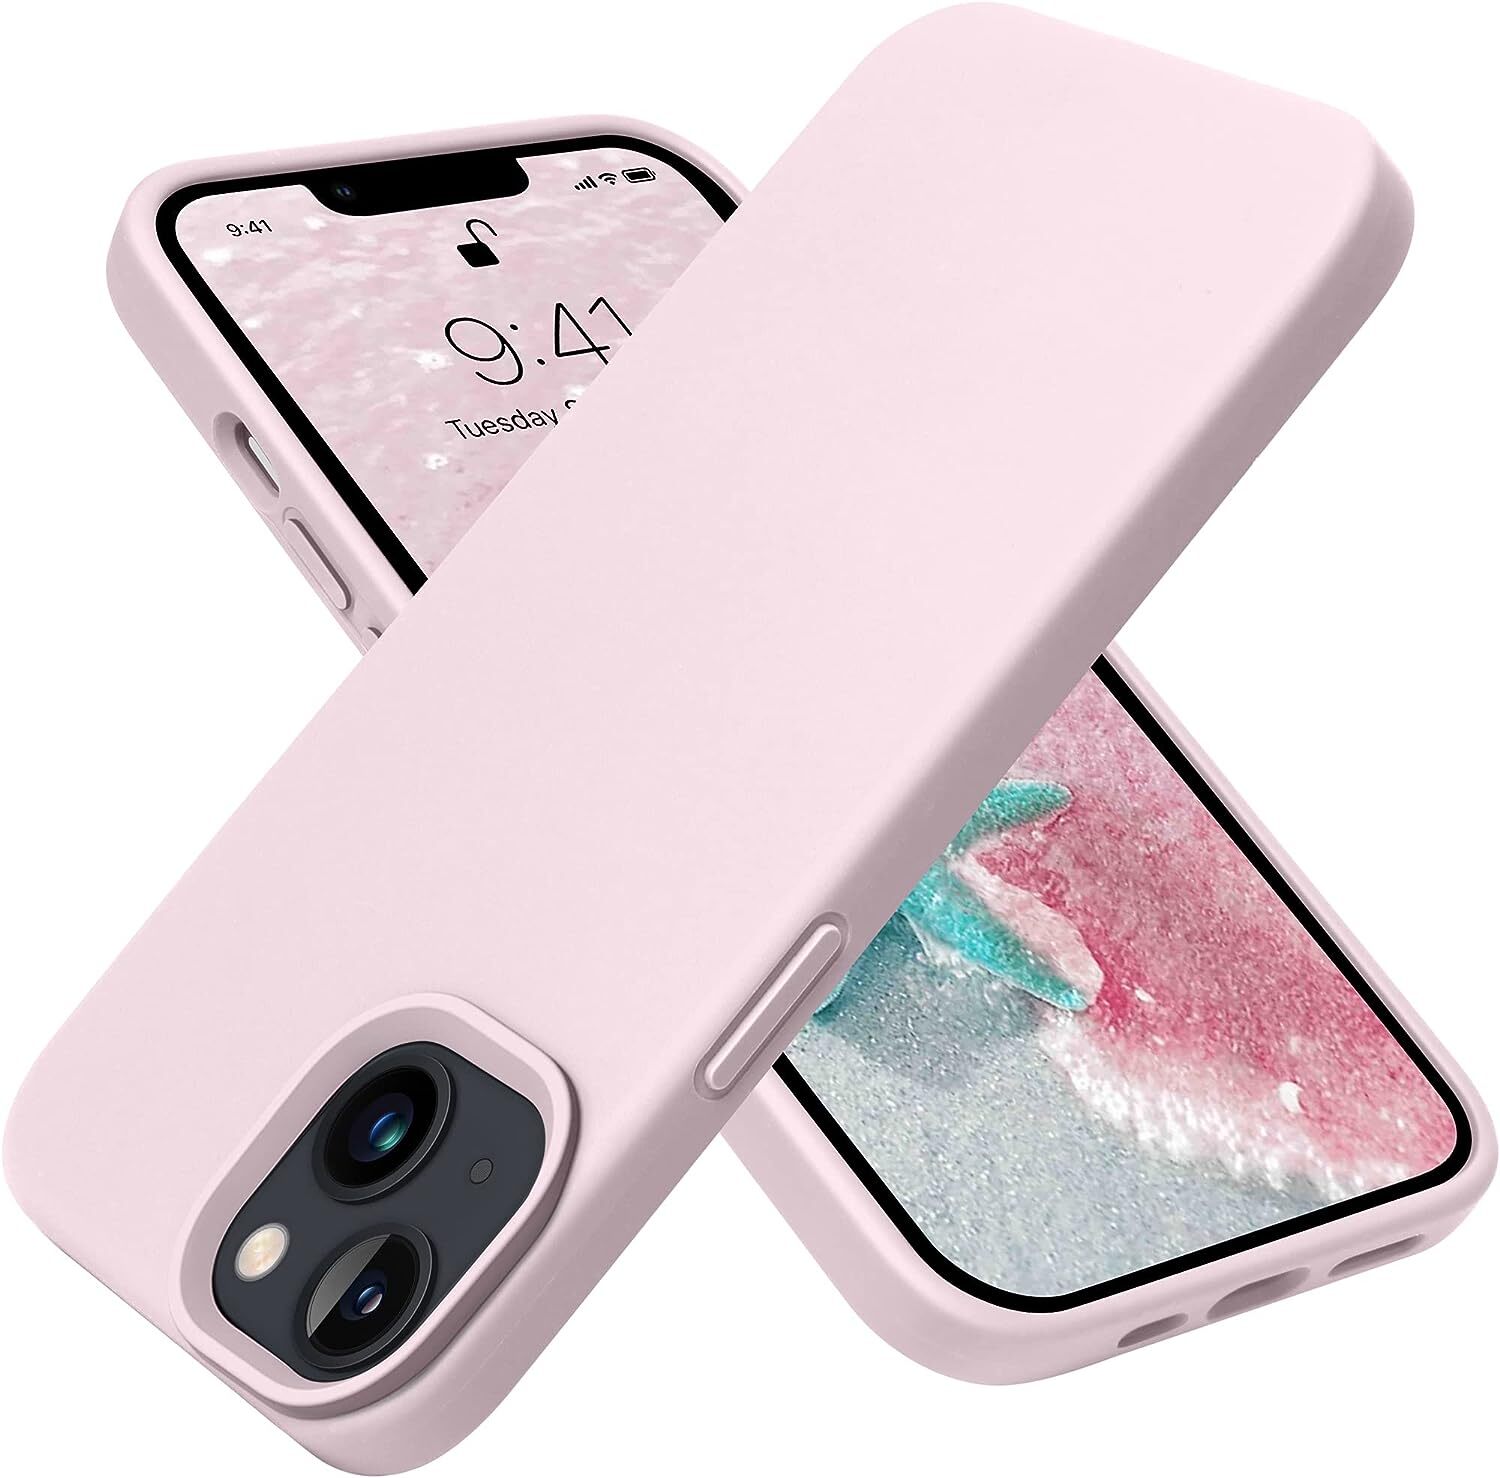 A phone with a pink silicone phone case on it